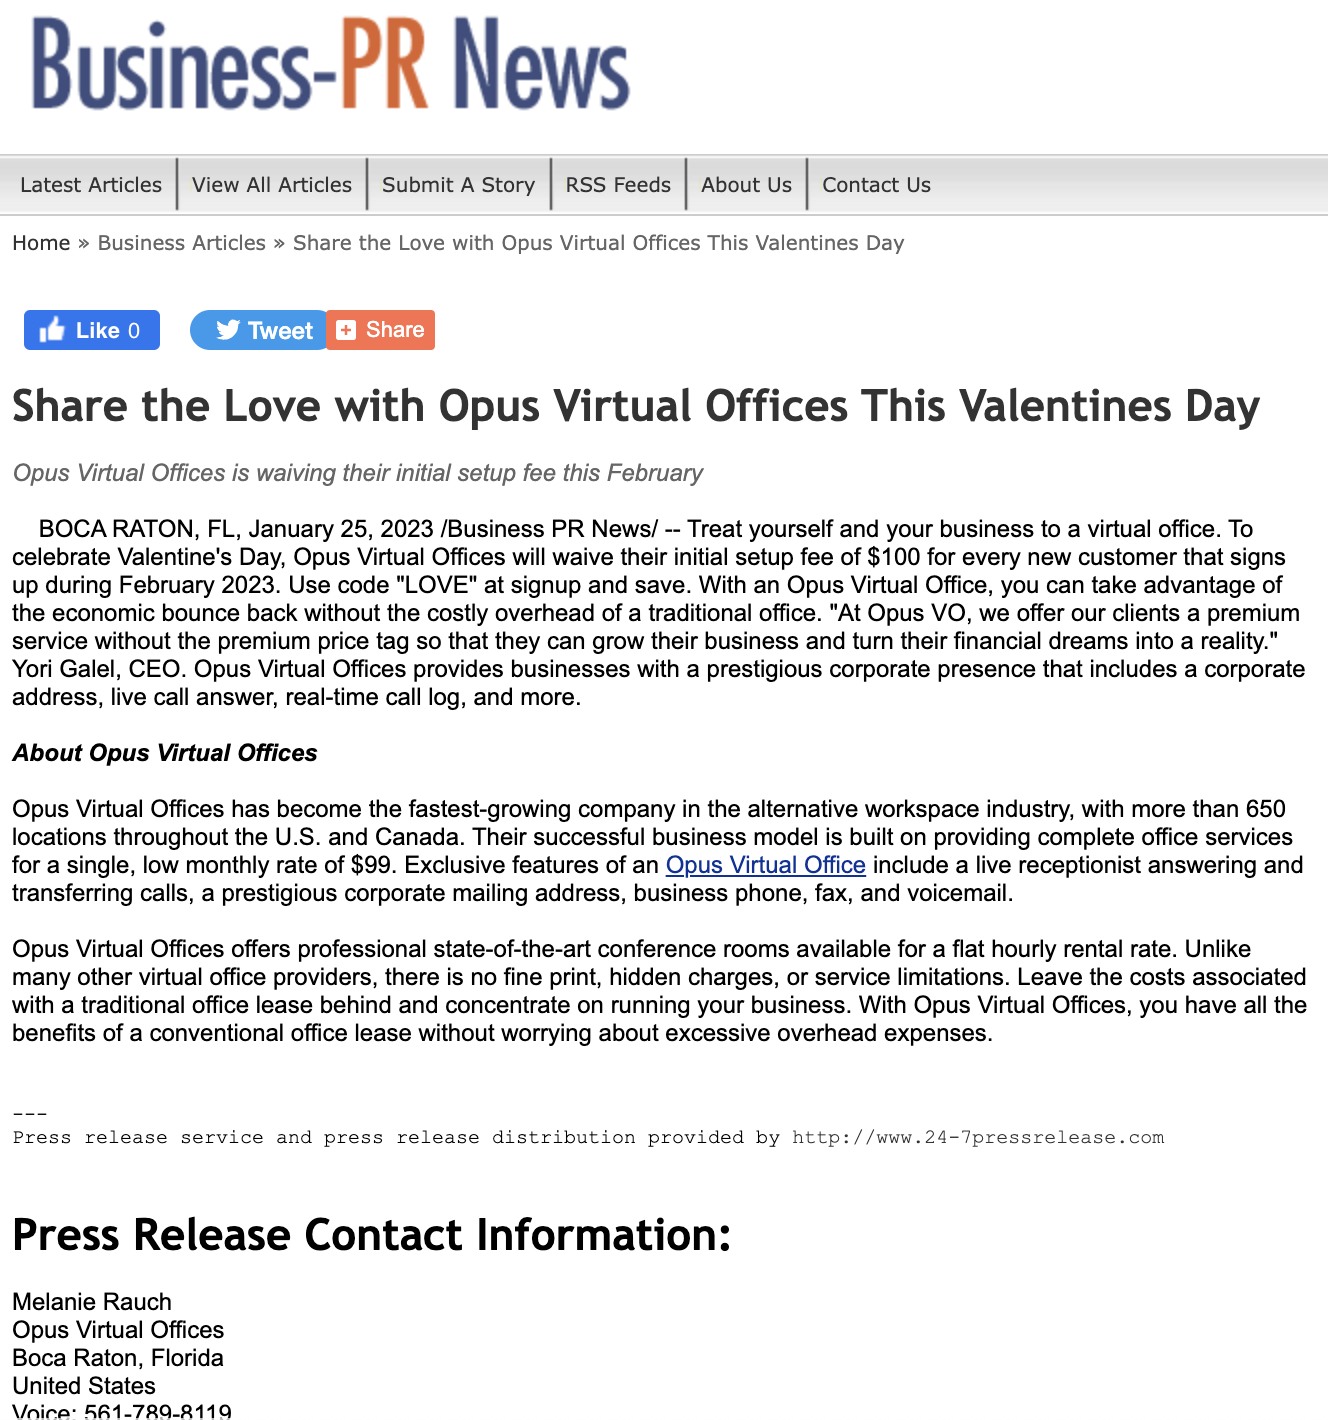 Share the Love with Opus VO This Valentines Day